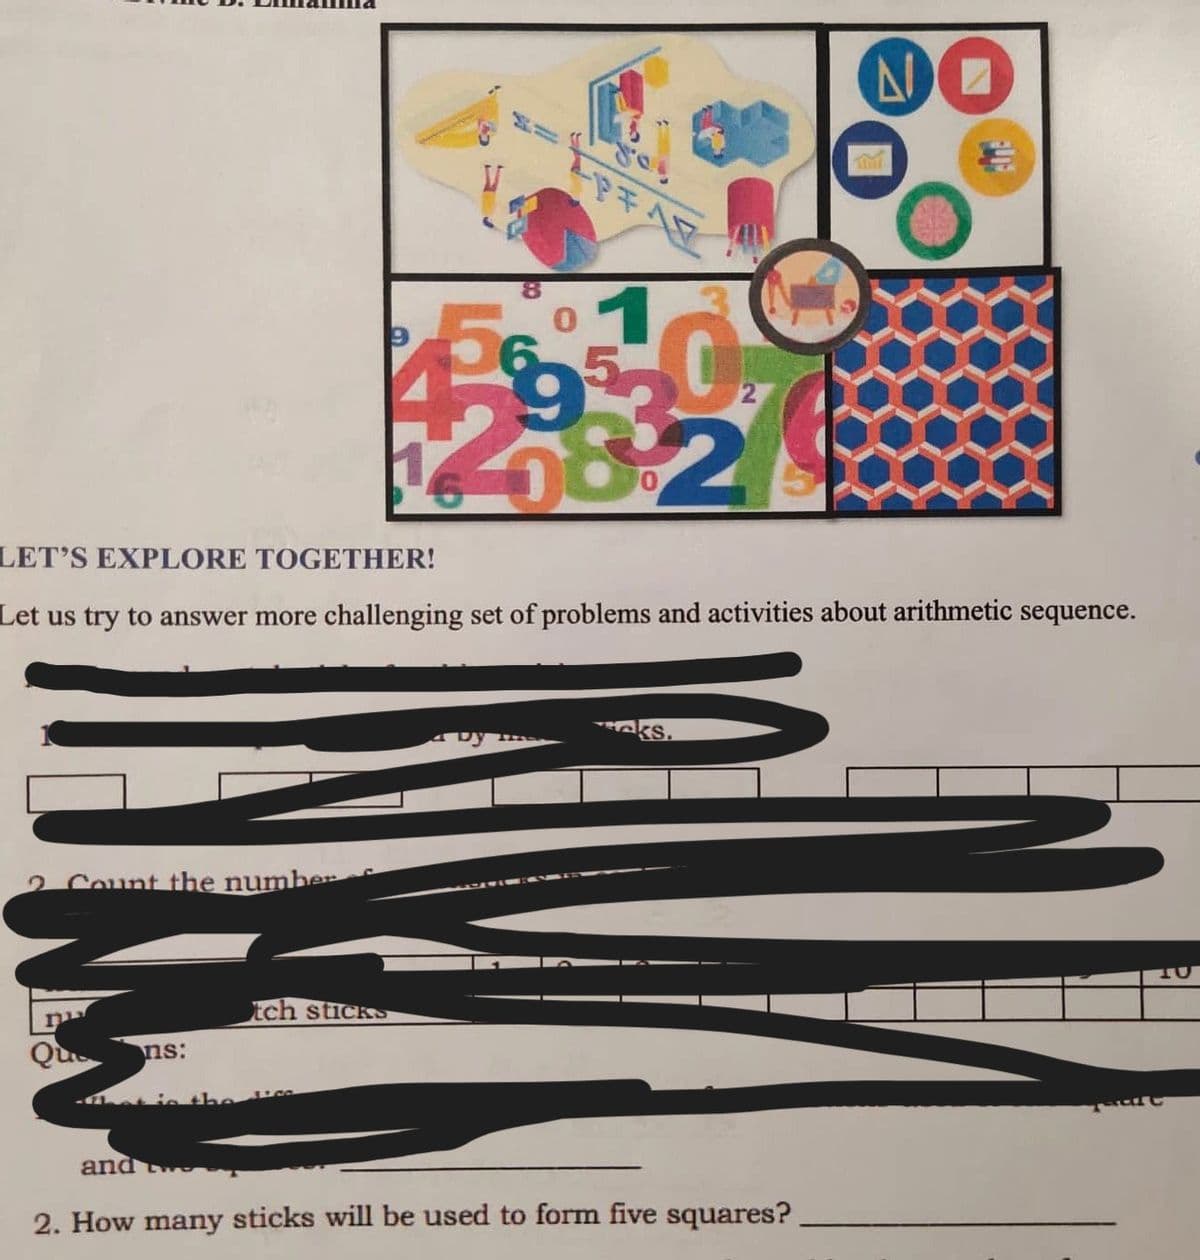 2 Count the number
and
ns:
-
LET'S EXPLORE TOGETHER!
Let us try to answer more challenging set of problems and activities about arithmetic sequence.
tch sticks
K
4
4 Dy
6-
ks.
NO
2. How many sticks will be used to form five squares?